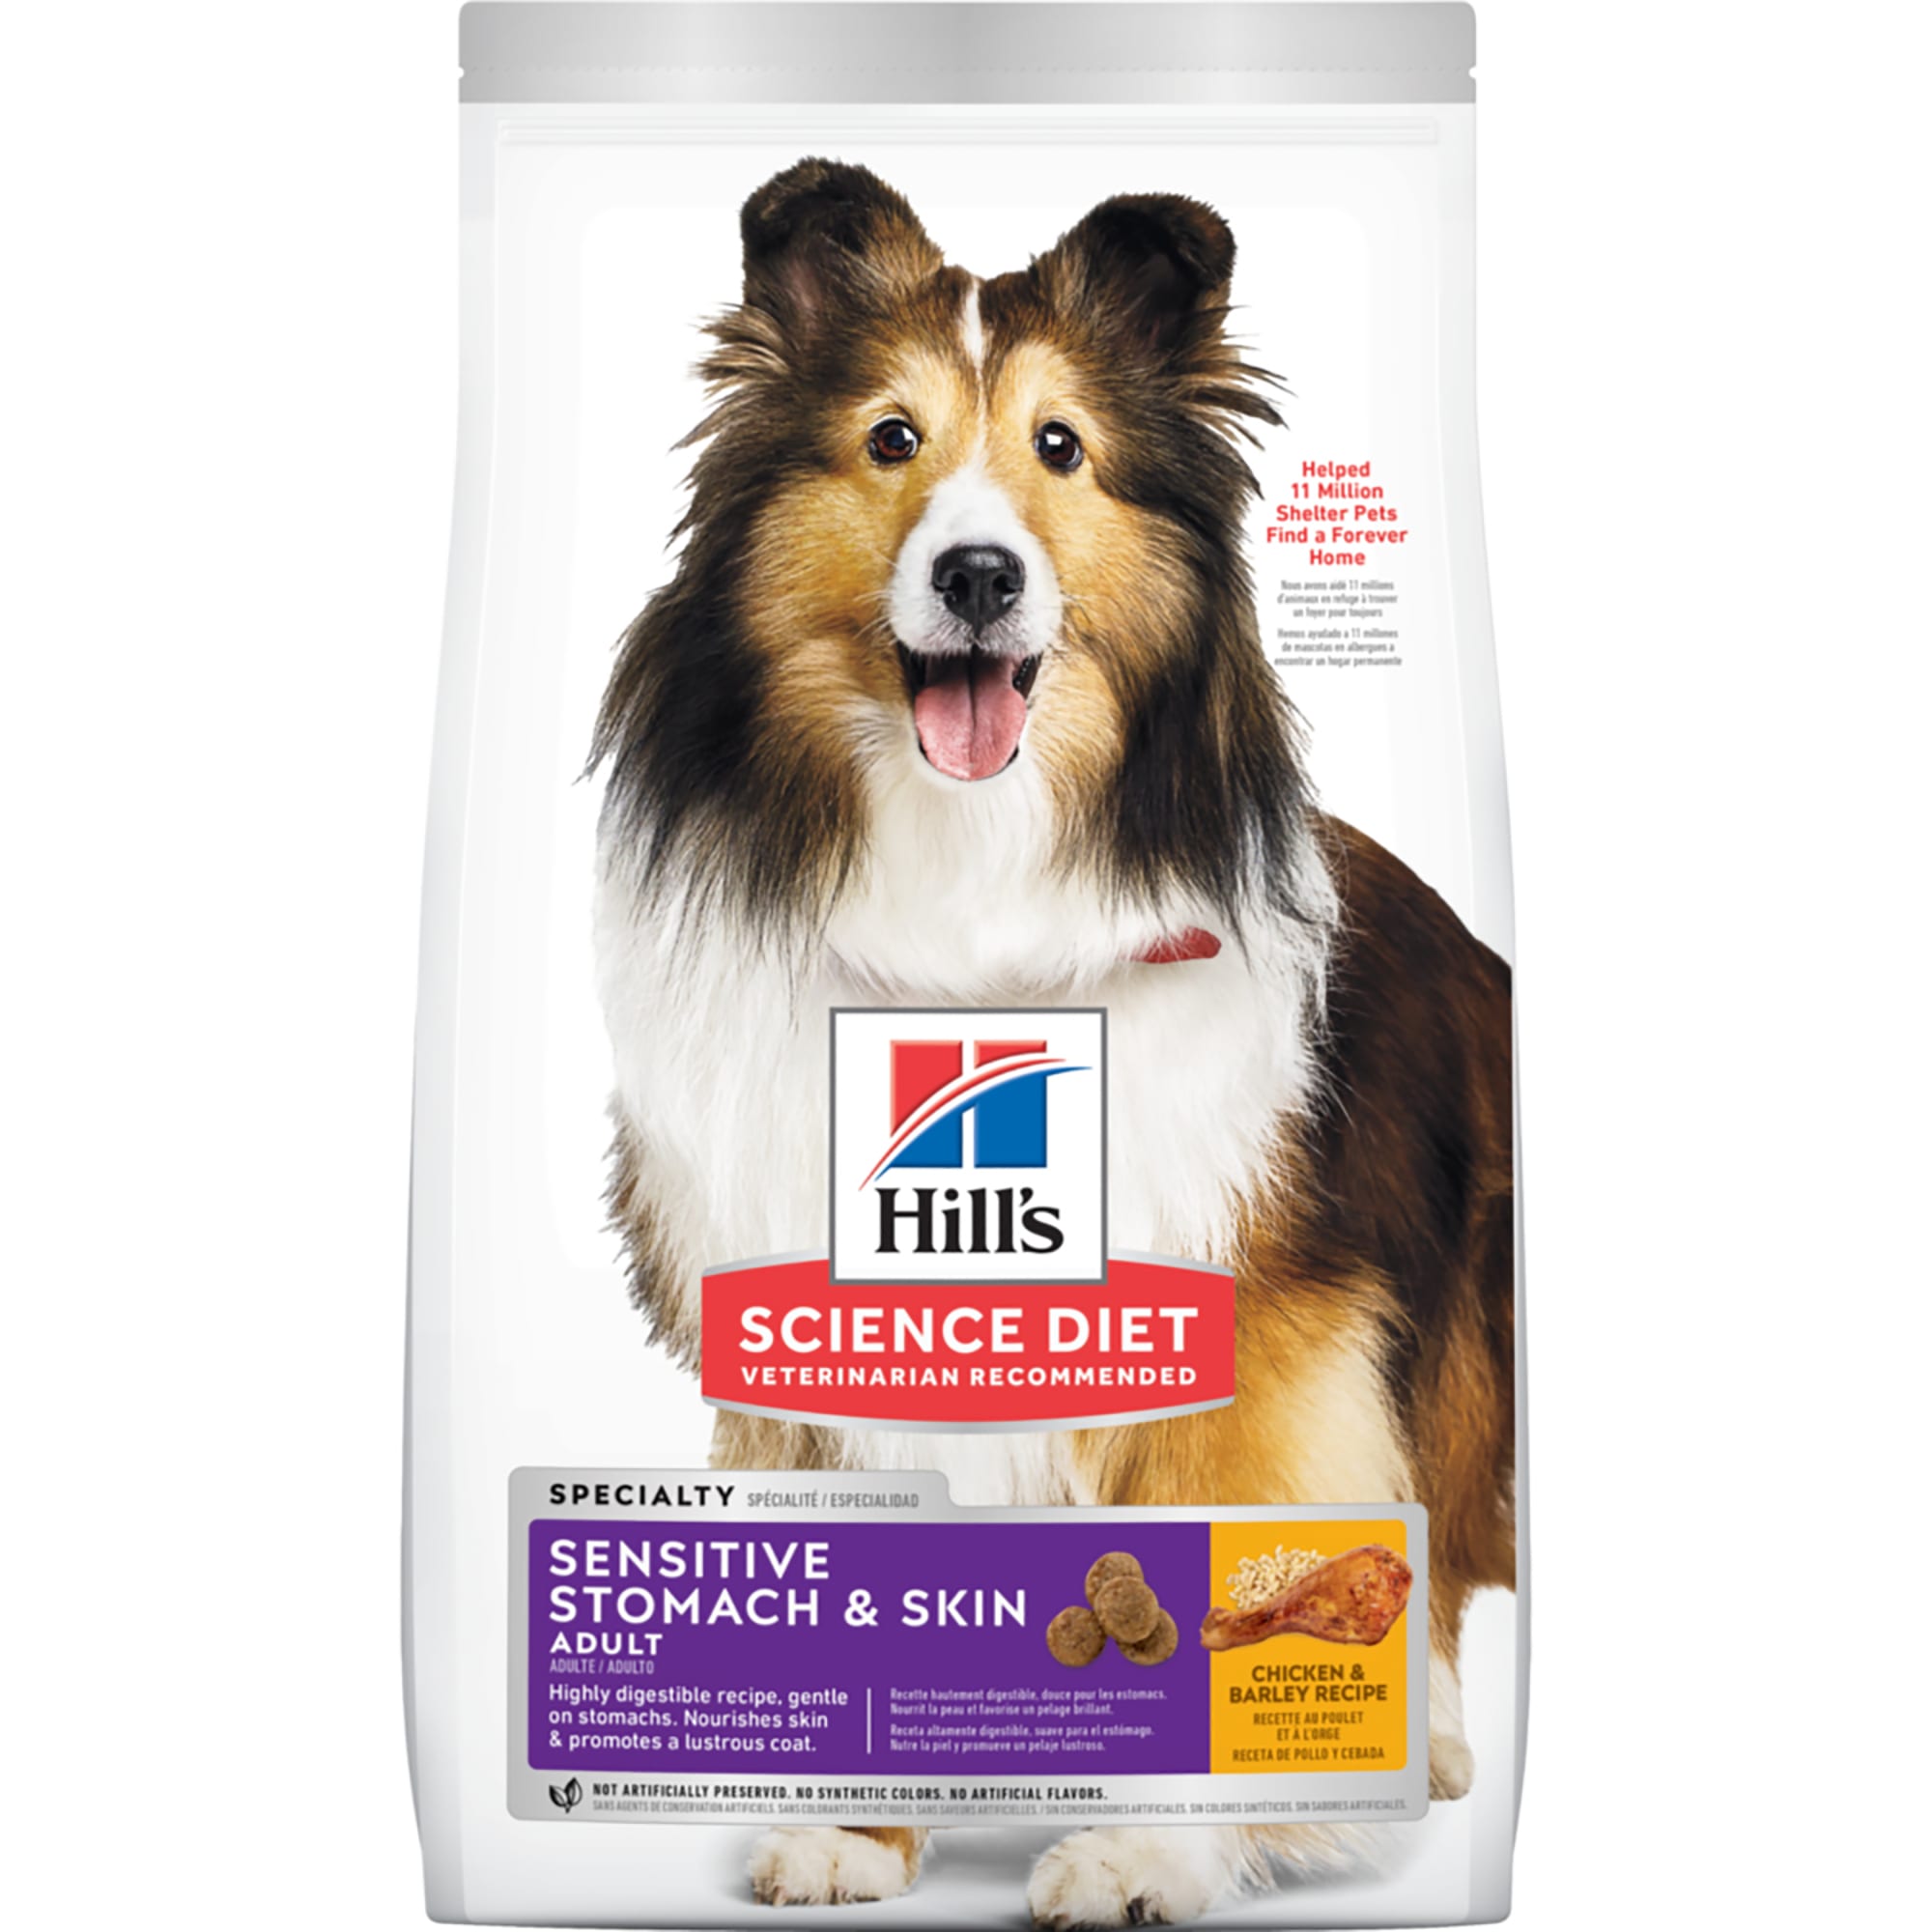 UPC 052742886008 product image for Hill's Science Diet - Dry Dog Food for Sensitive Stomach & Skin, Hills Diet Dog  | upcitemdb.com